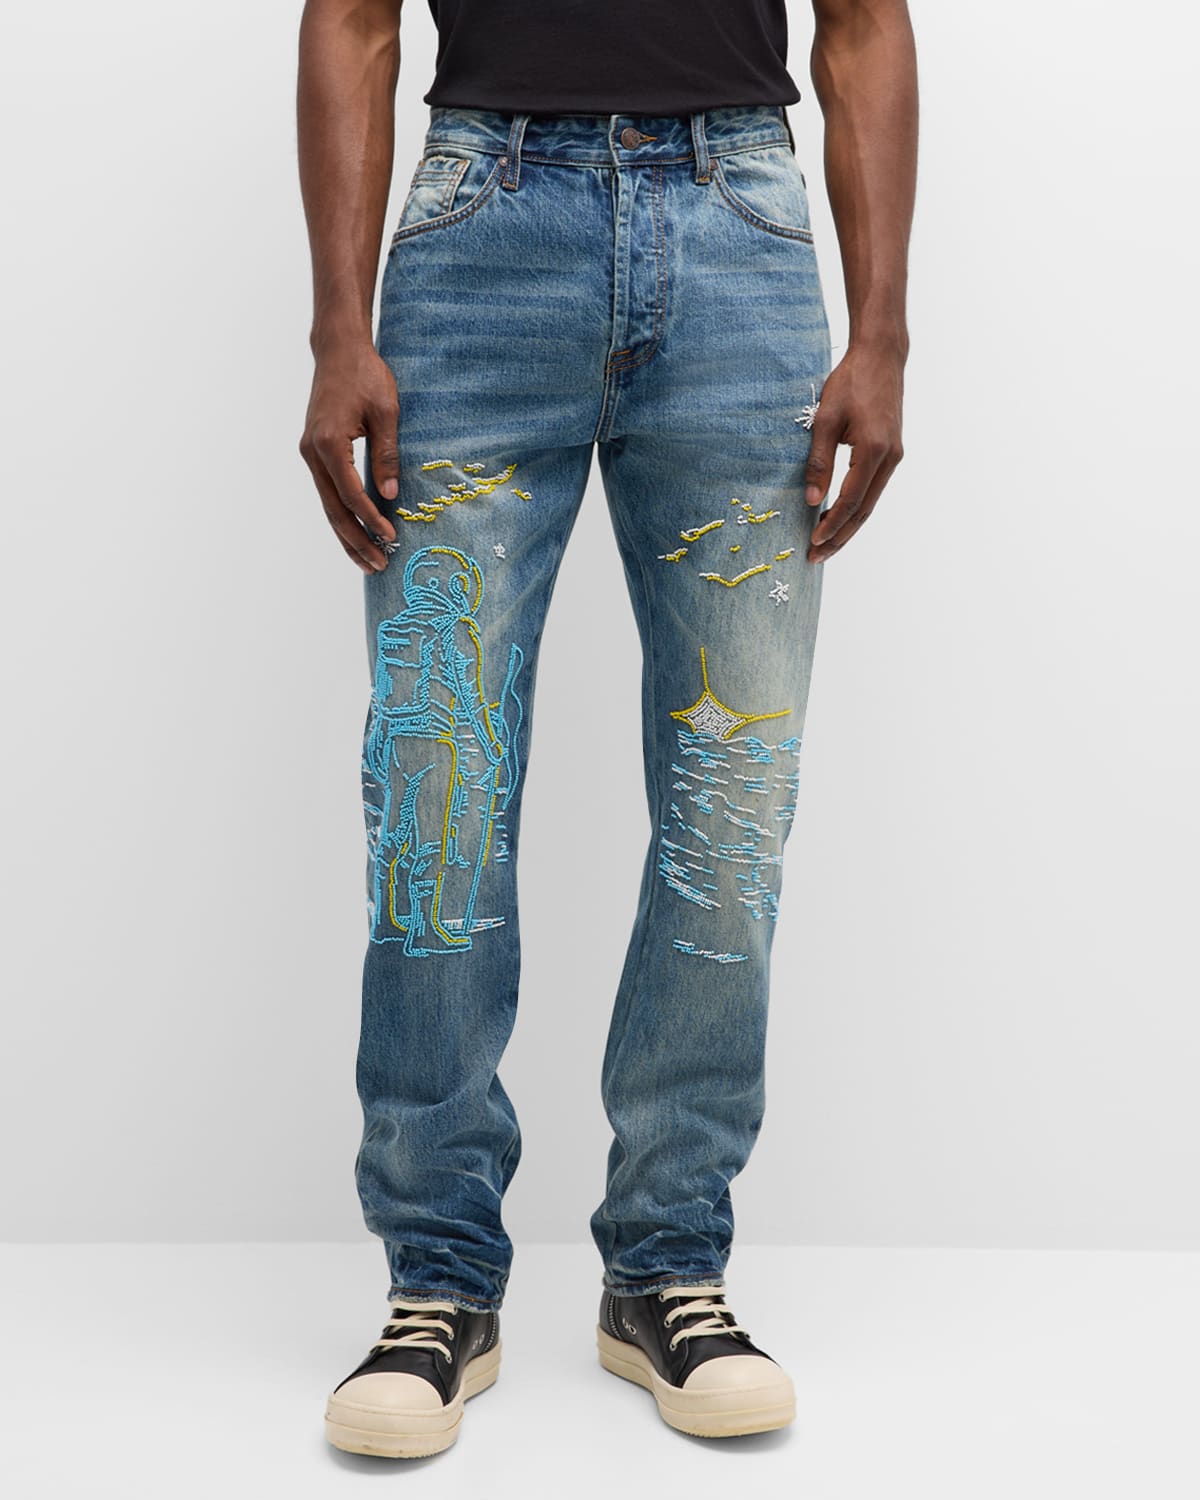 Men's Starcrossed Embroidered Jeans